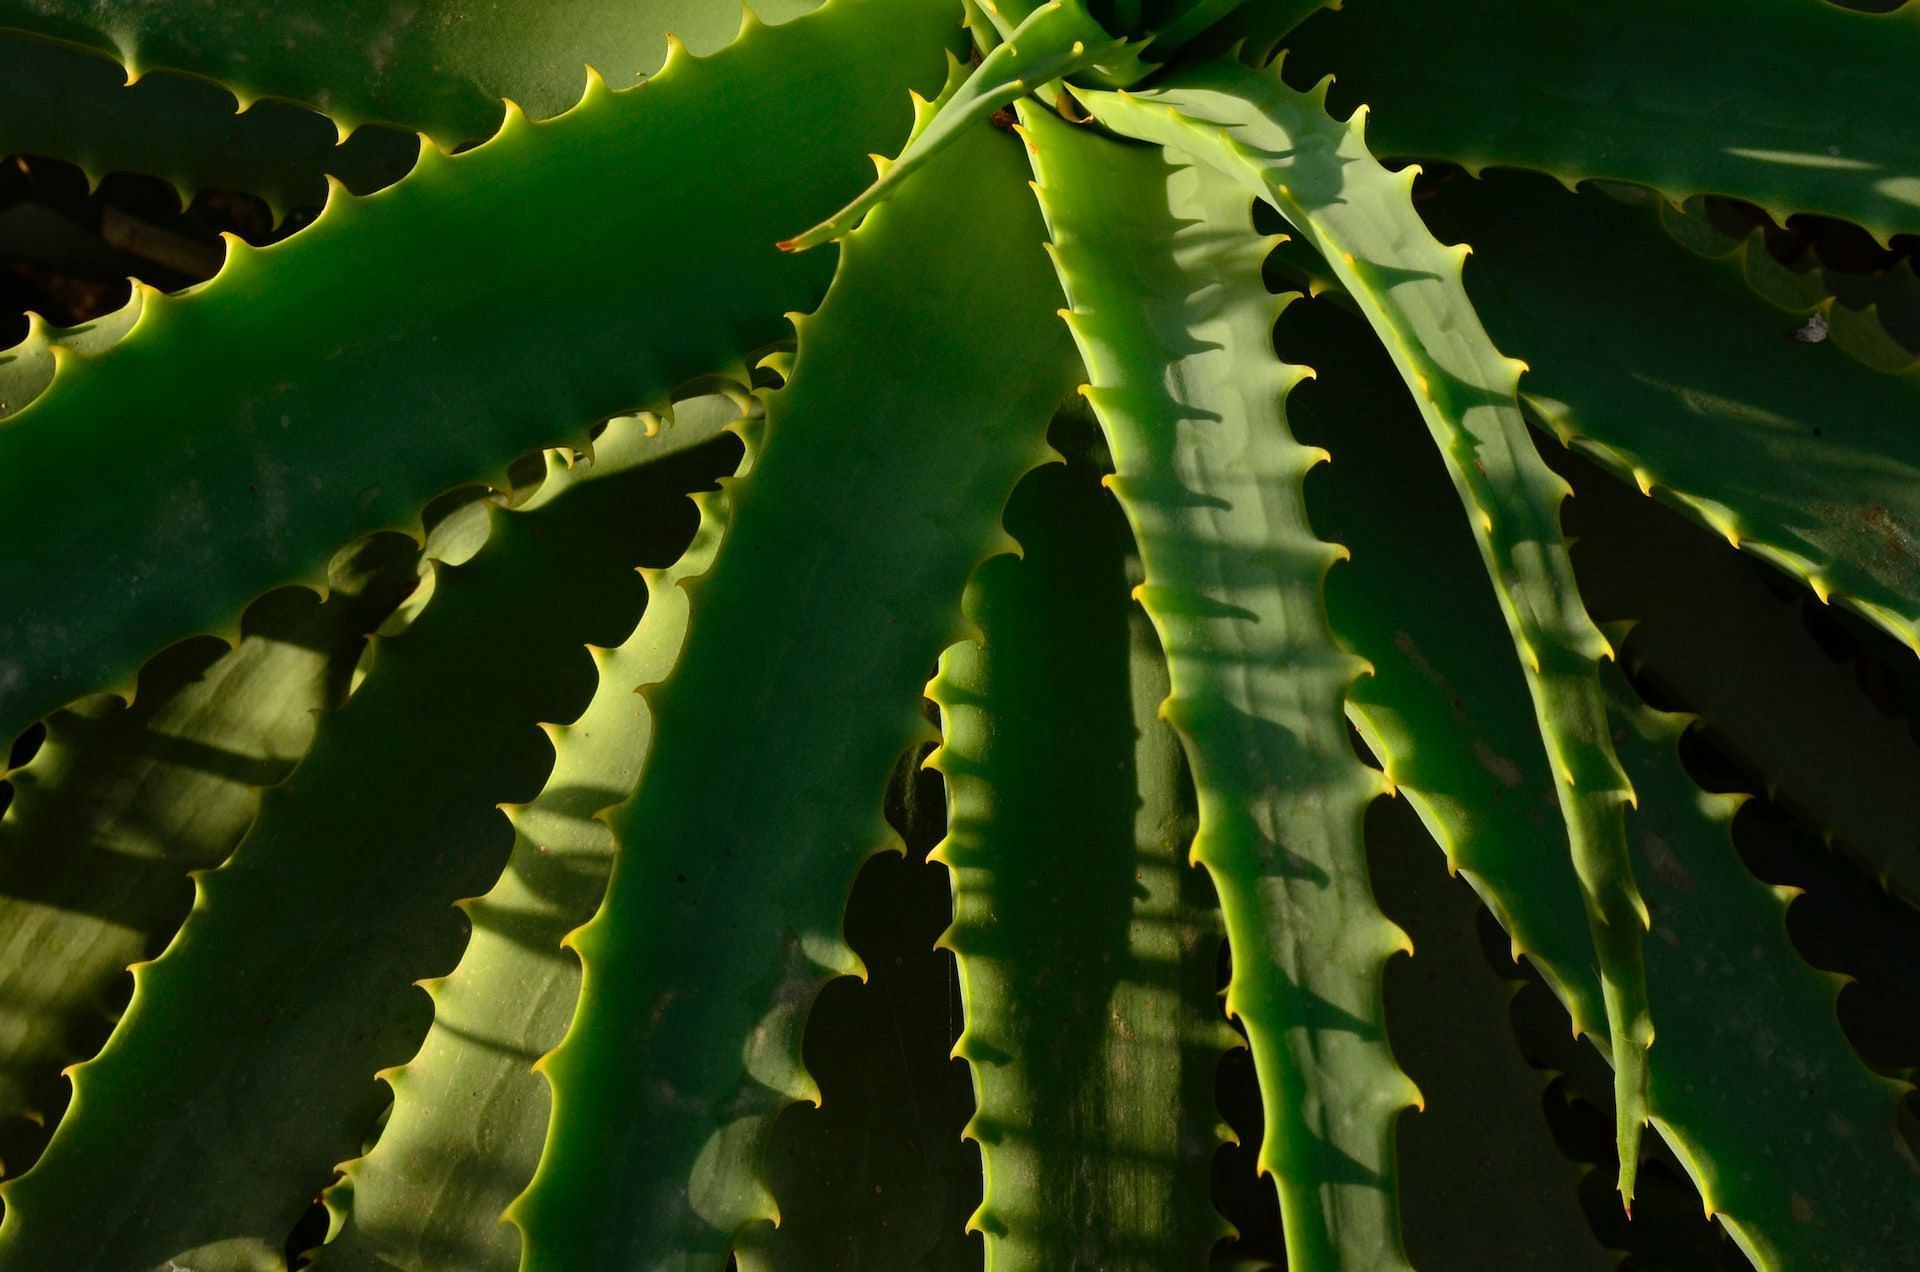 Aloe vera soothes the skin and reduce itching. (Photo via Pexels/Julia Sakelli)